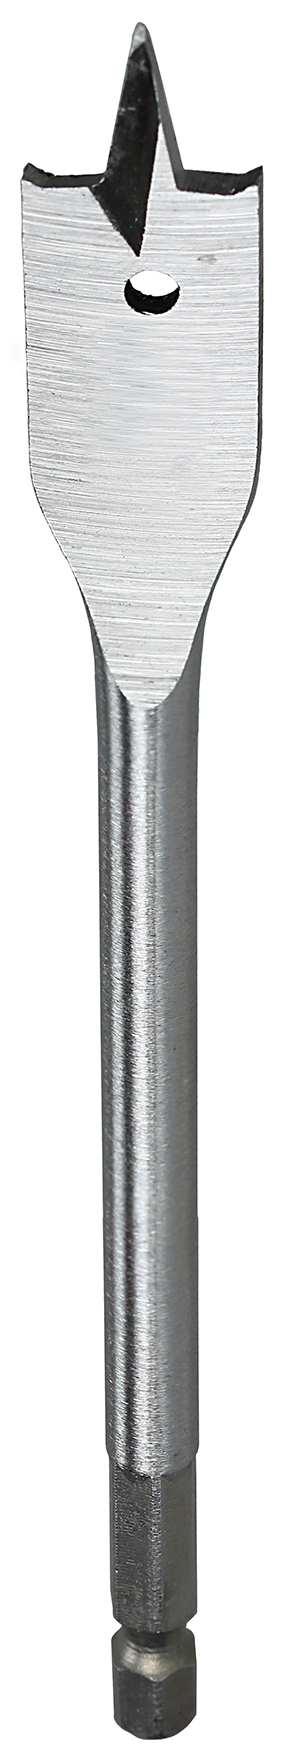 Spade Drill Bit, 1/4 in. Size, Hex shank type, Cold Forged Steel material, 6 in. drilling depth